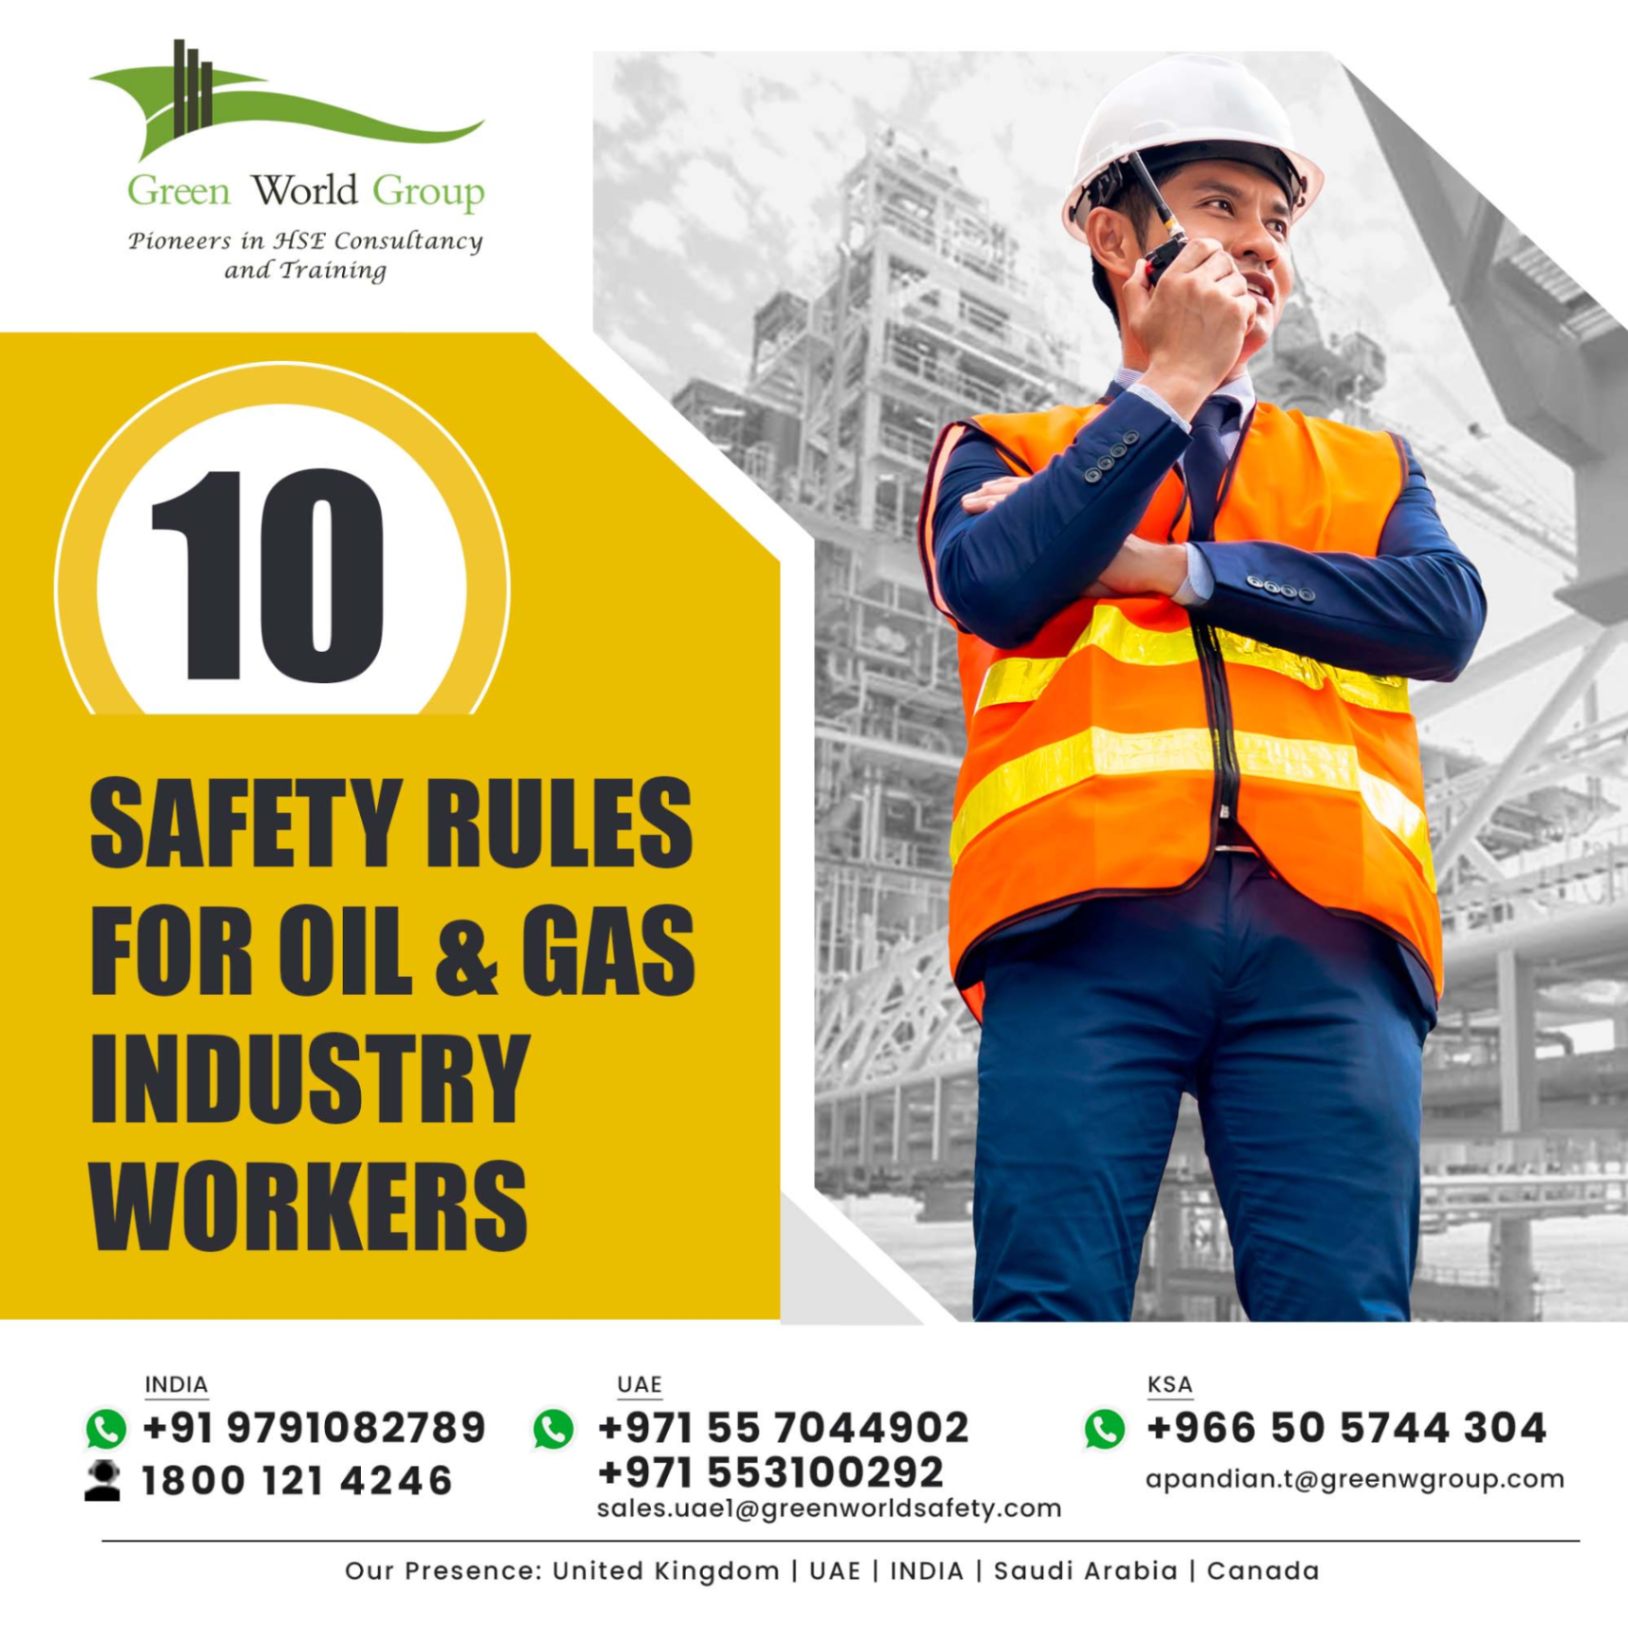 Top 10 Safety Rules for Oil & Gas Industry Workers